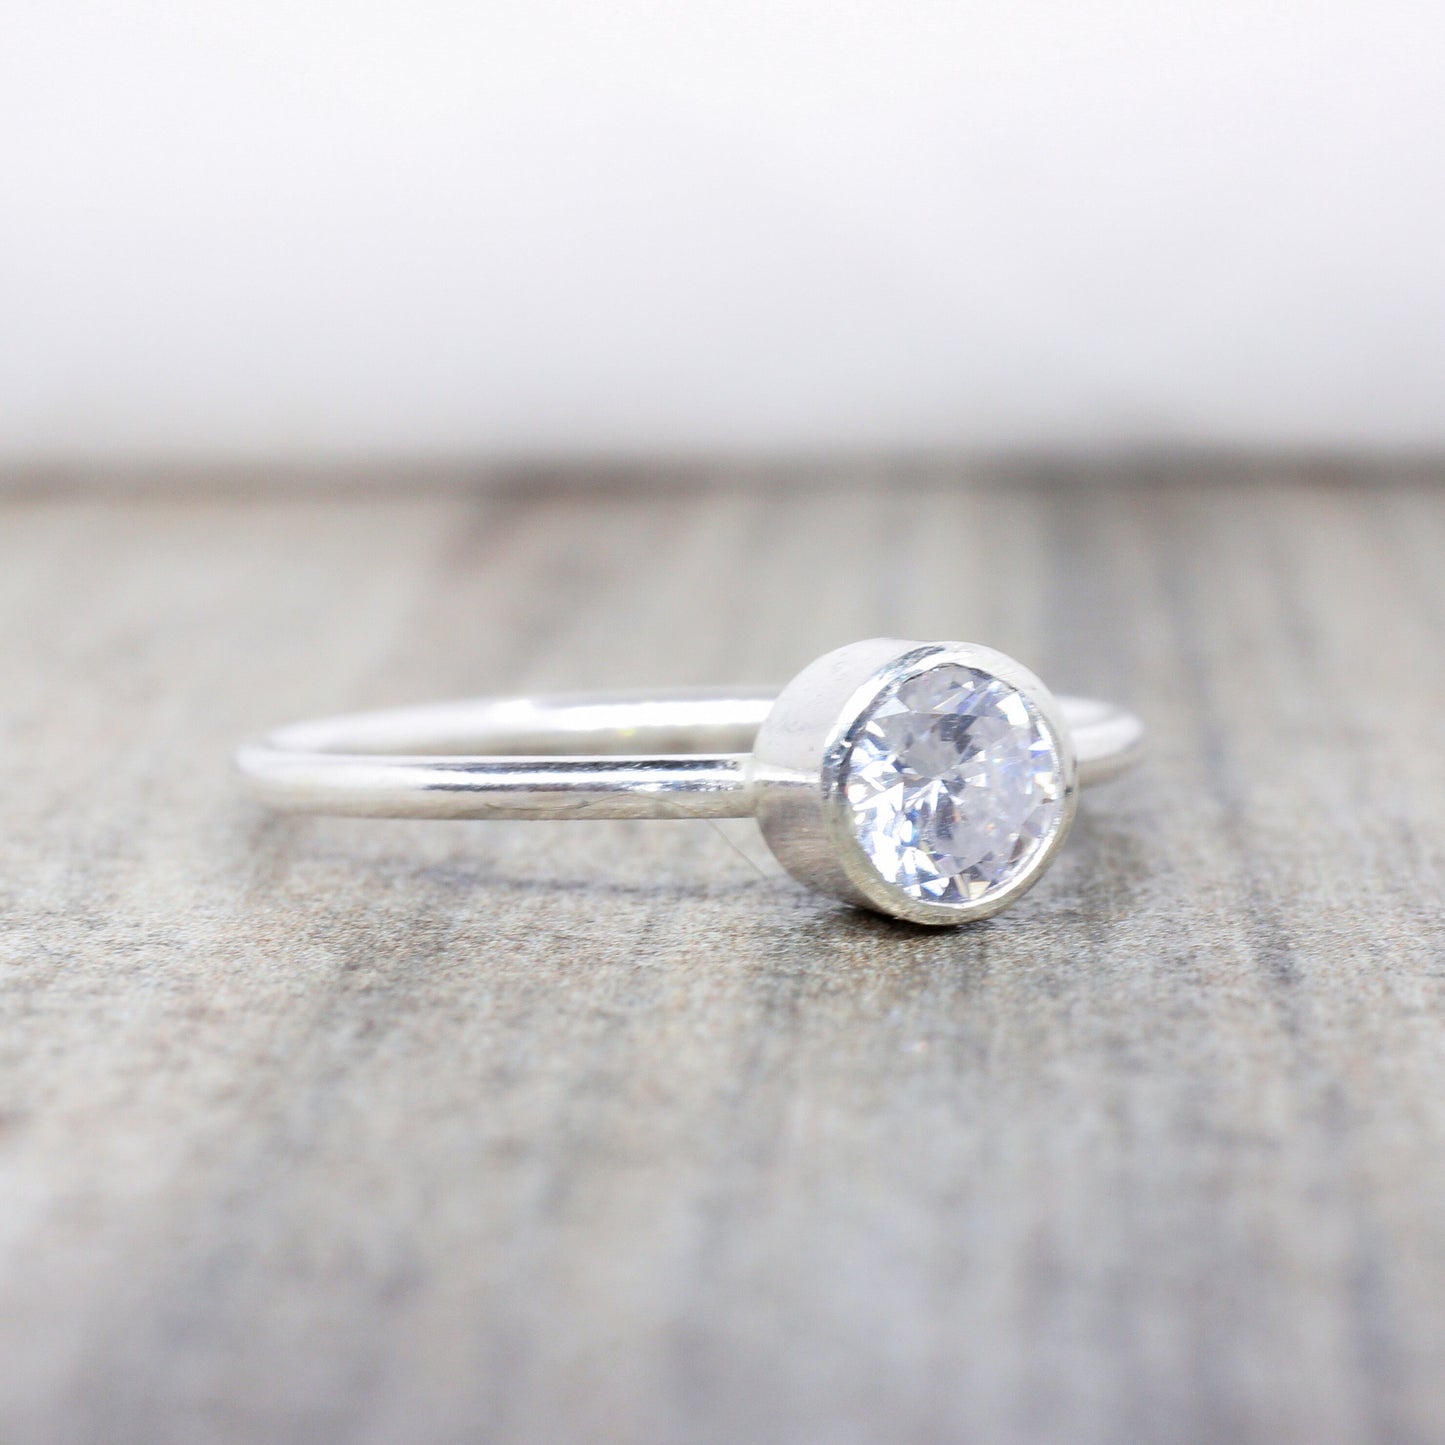 Genuine White Topaz Stacking Ring in Sterling Silver// 5mm Faceted Gemstone April Birthstone